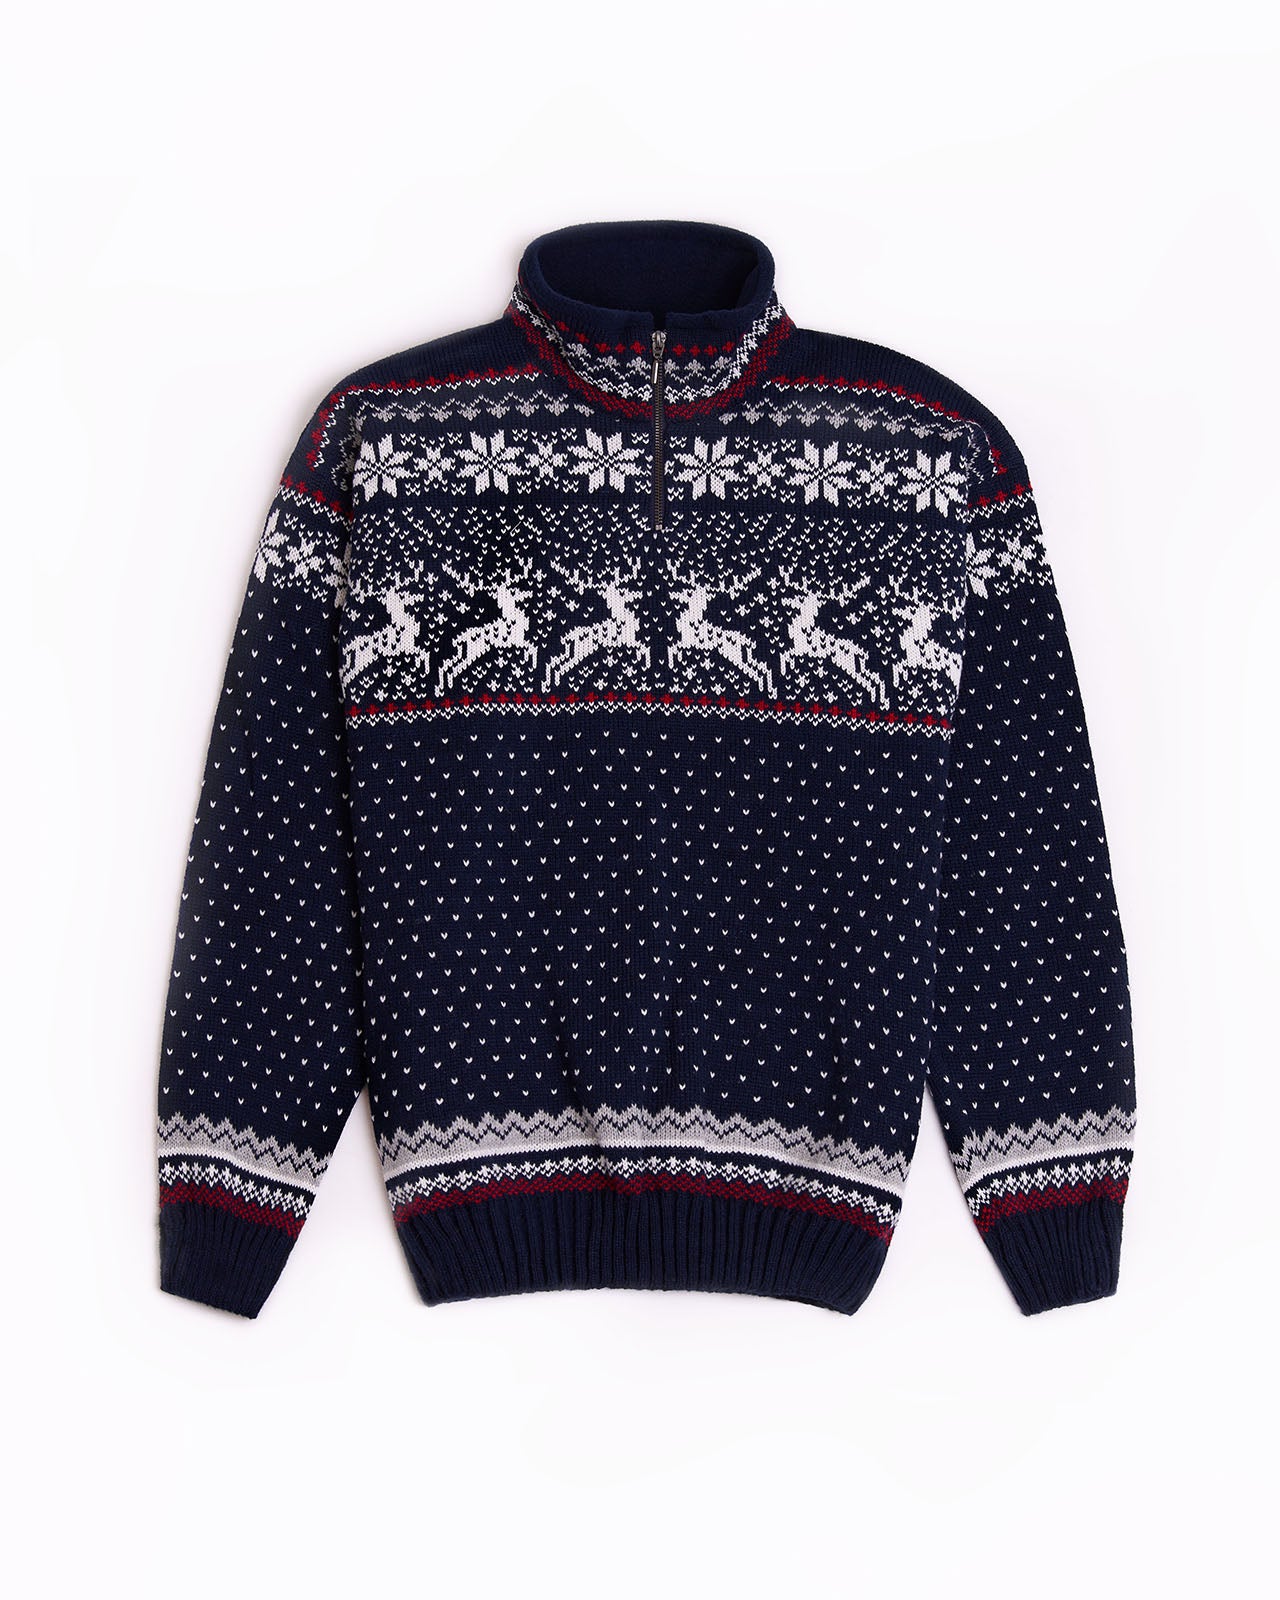 Wool men's collared sweater with reindeers